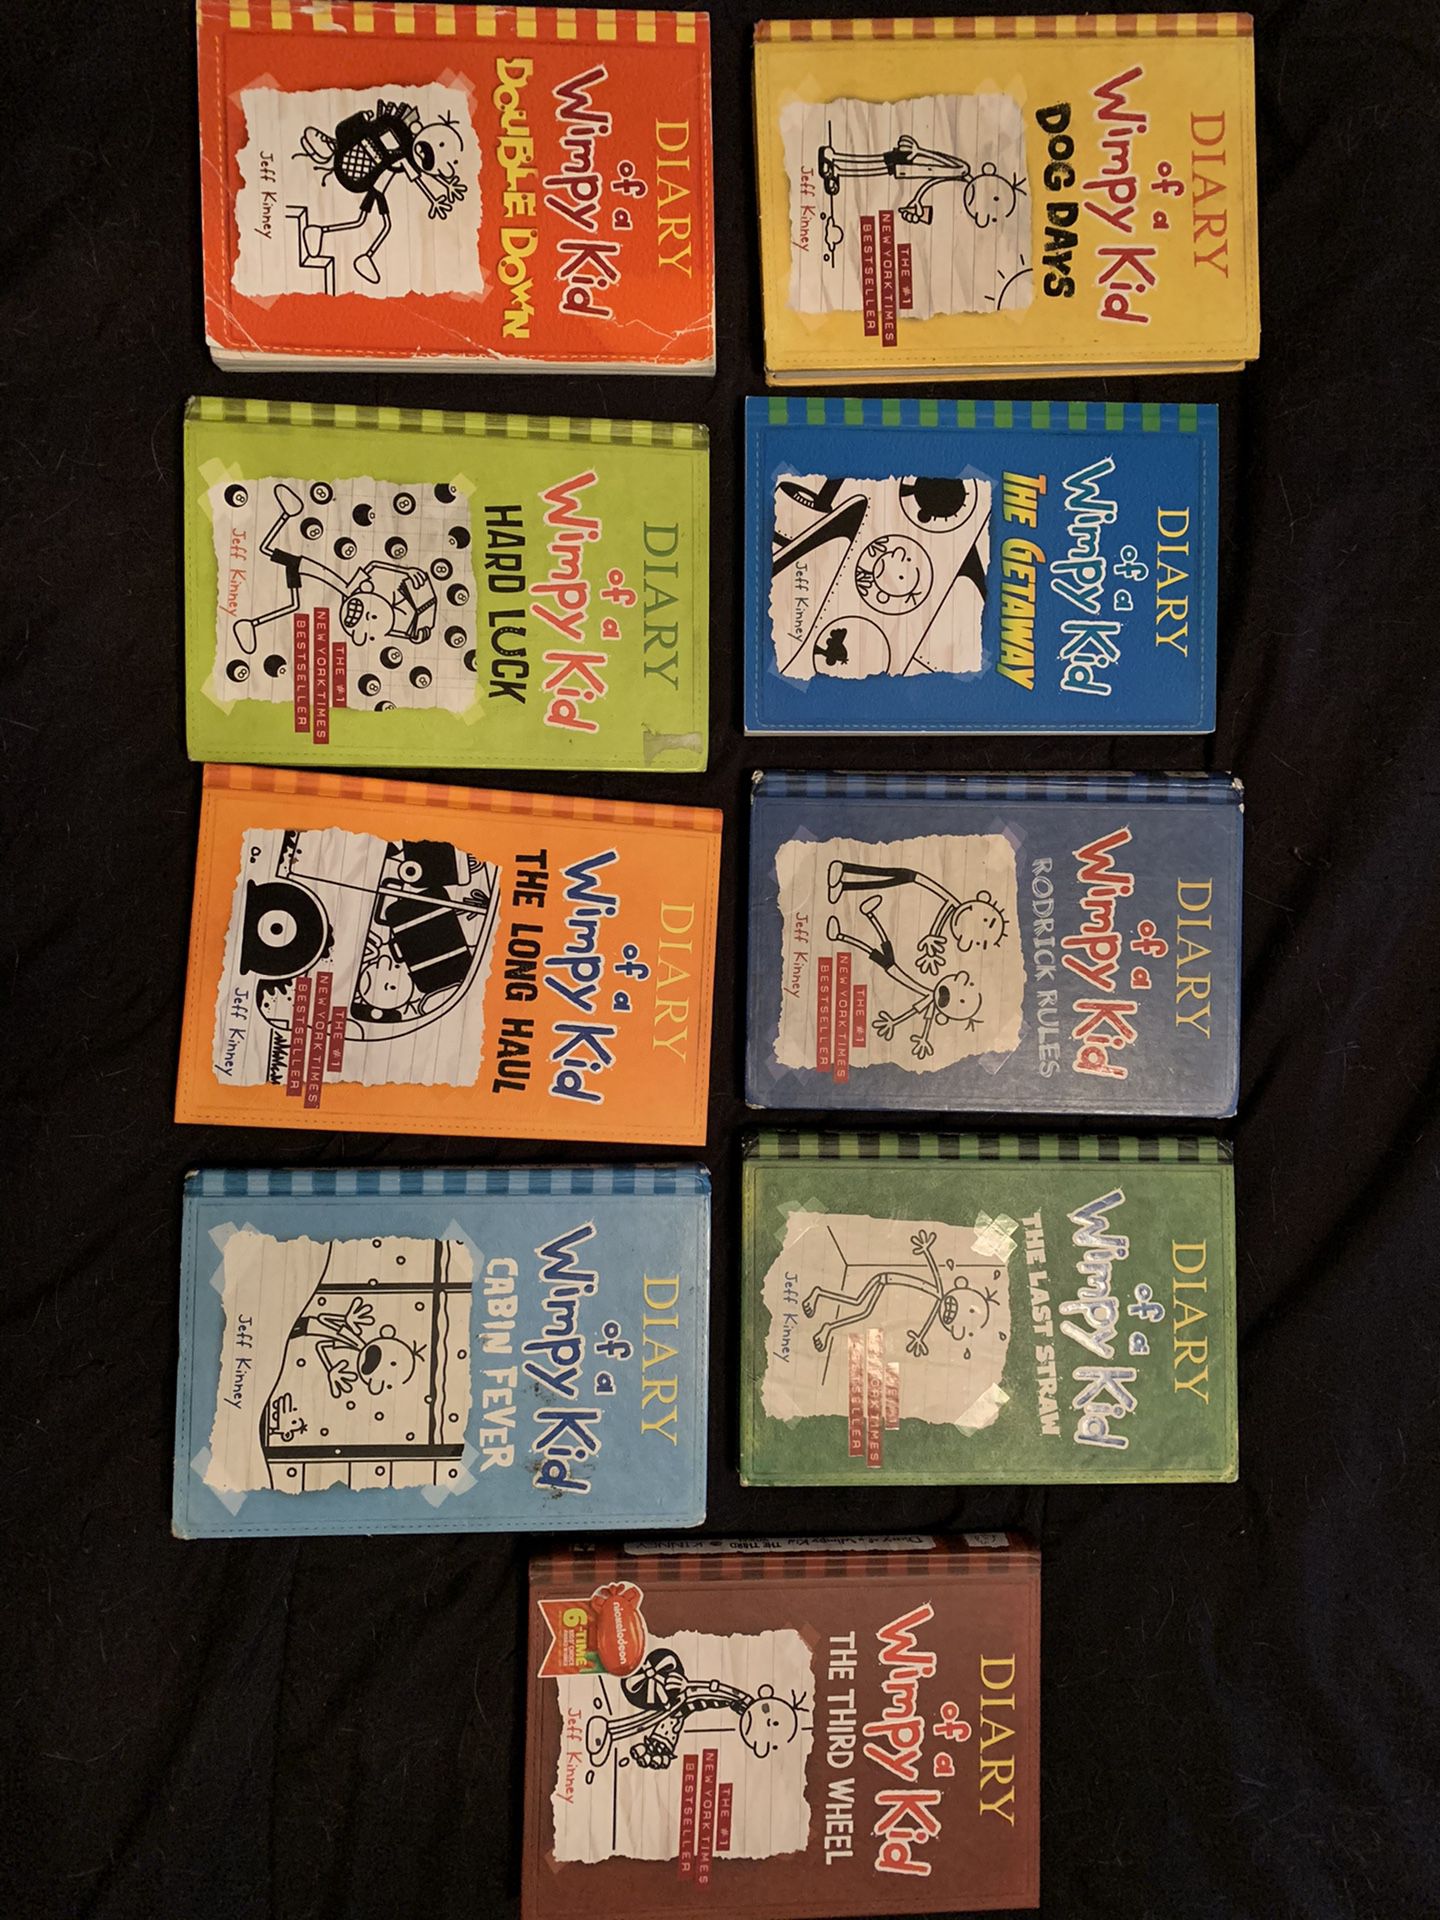 Diary of a wimpy kid series of books